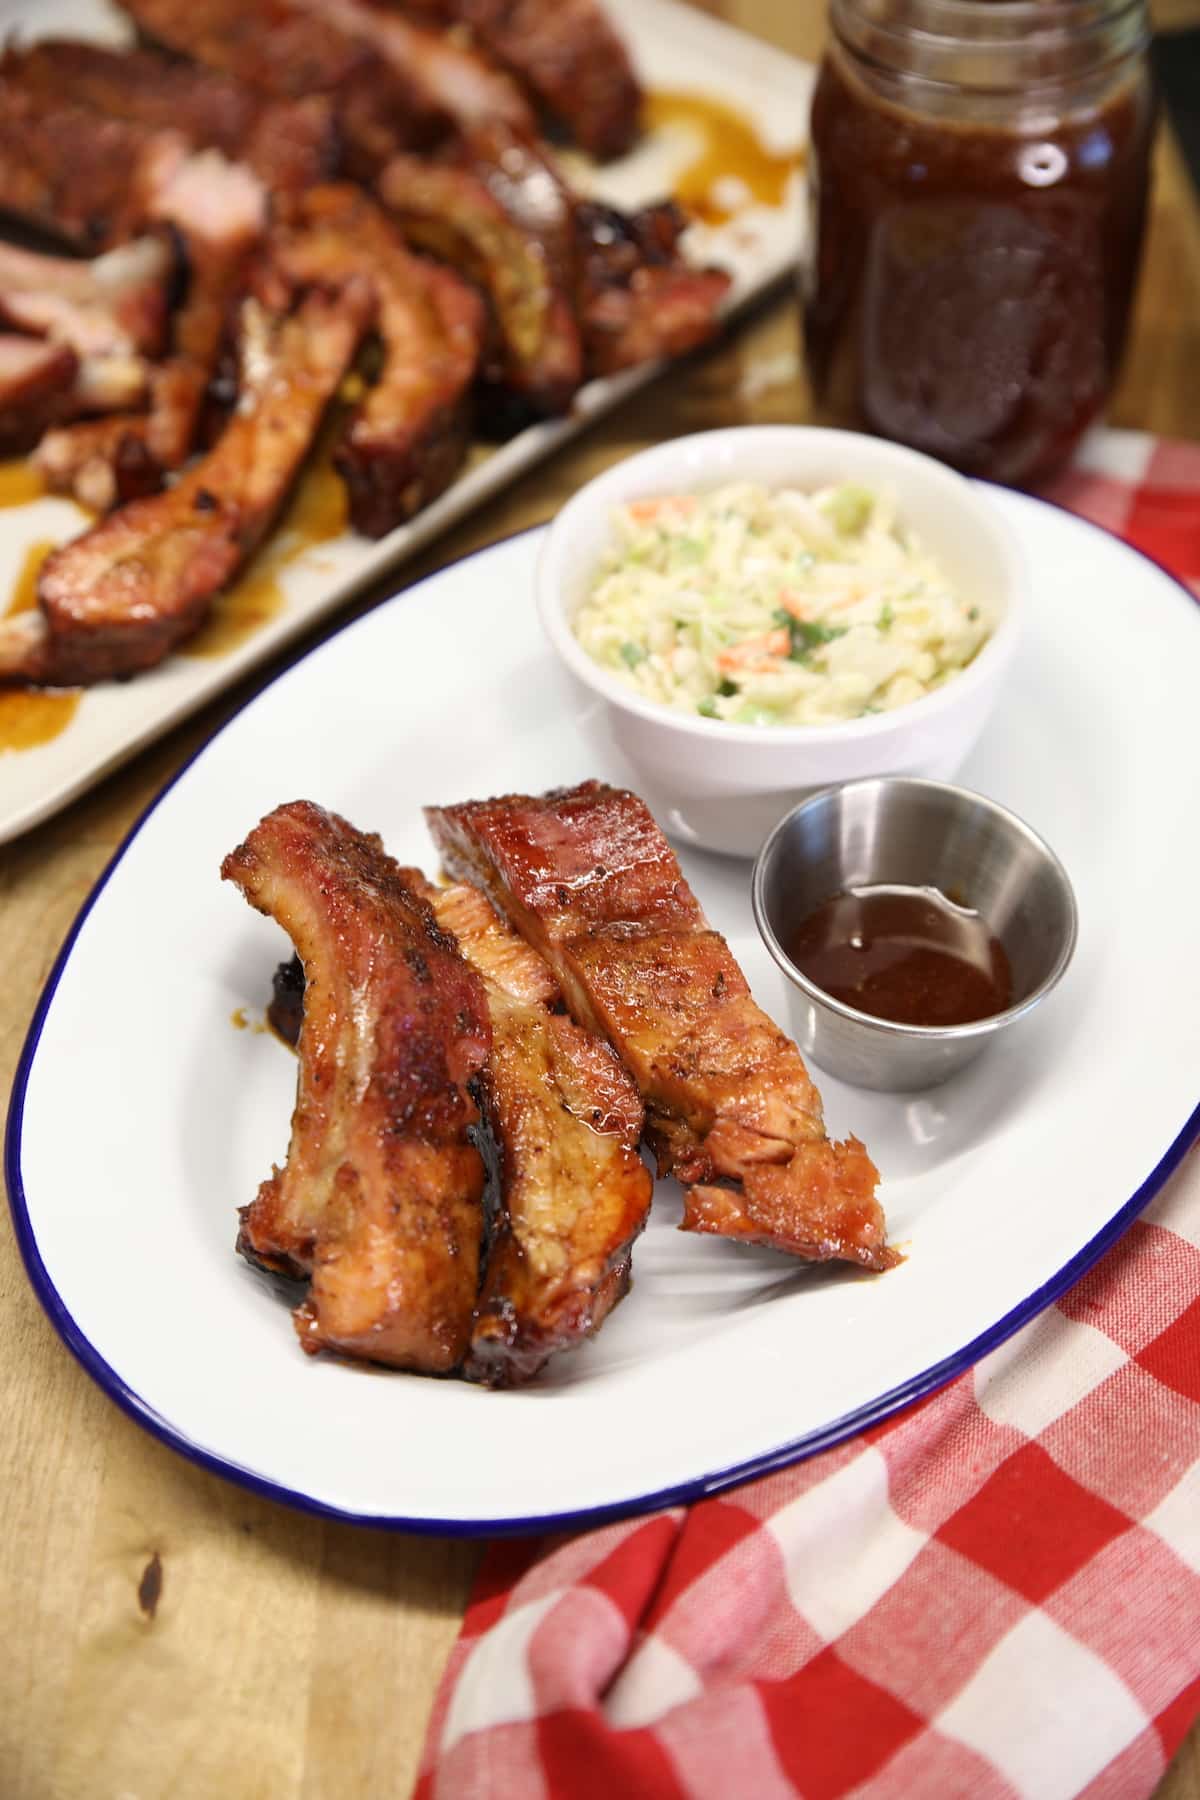 Plate of ribs with sauce with bowl of slaw.